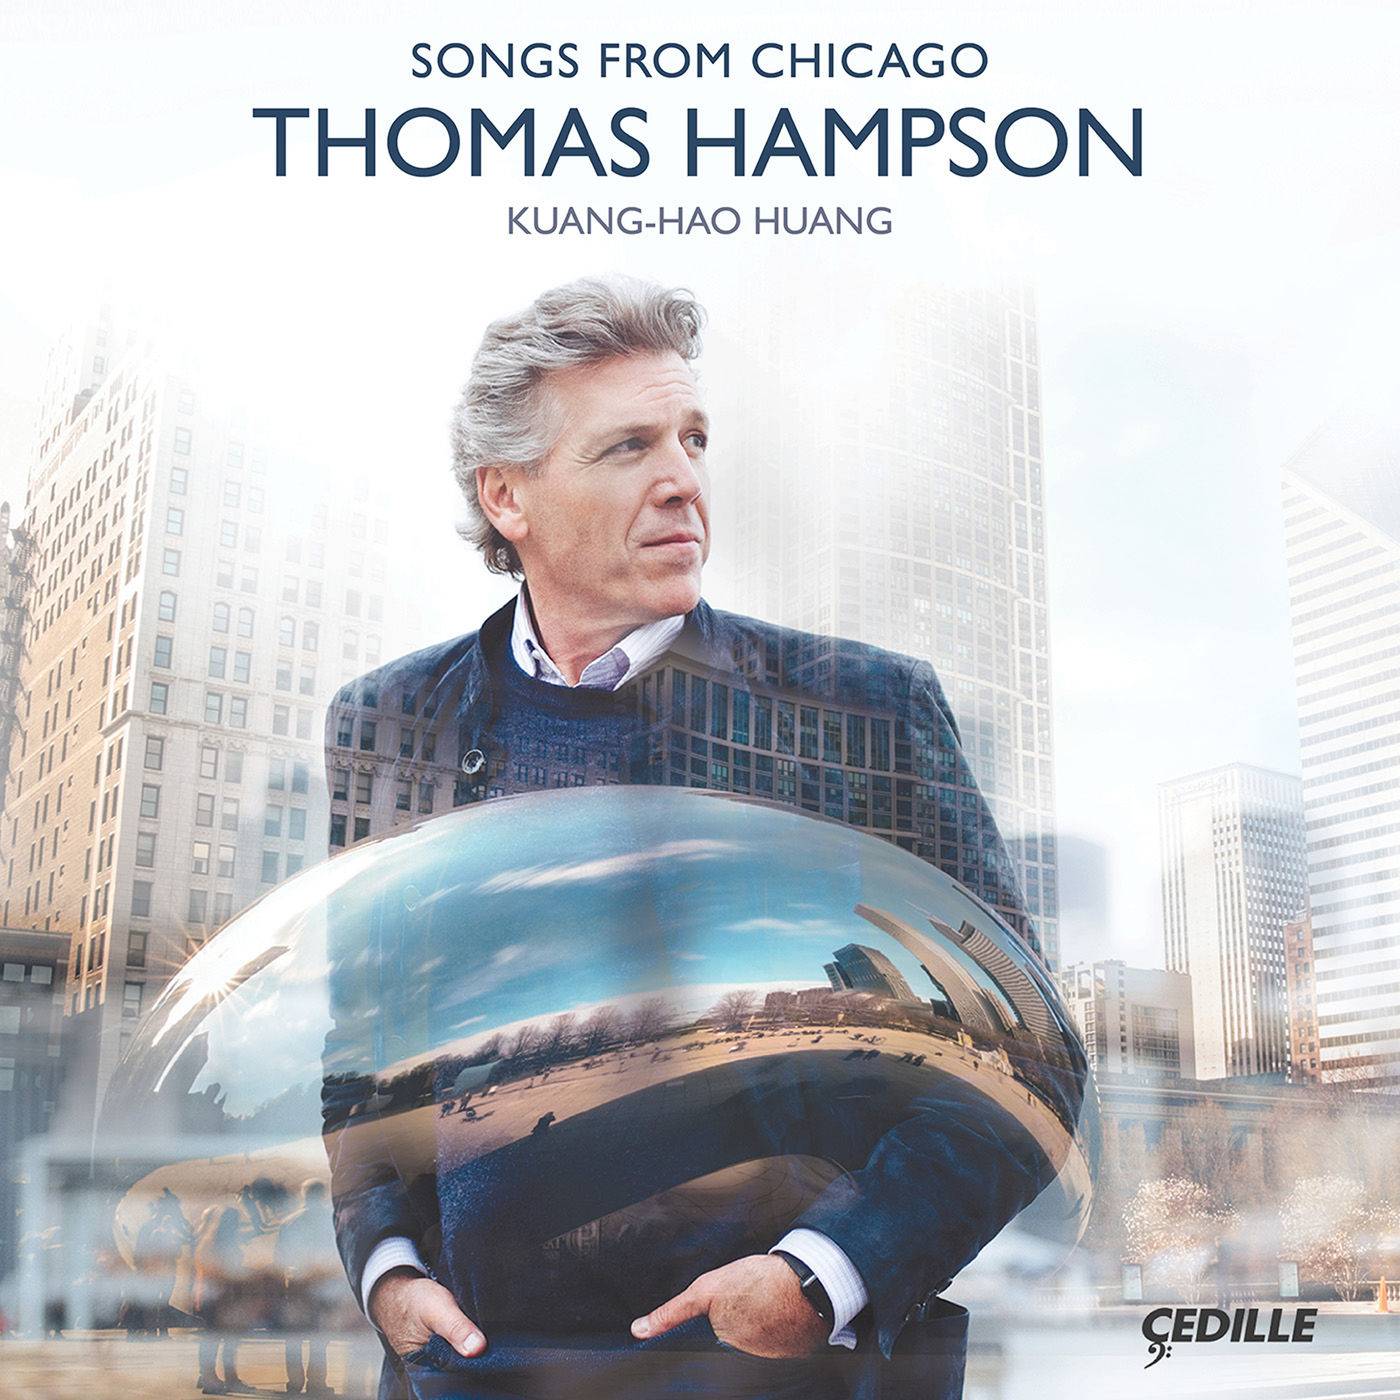 Thomas Hampson - Songs from Chicago (2018) [FLAC 24bit/96kHz]